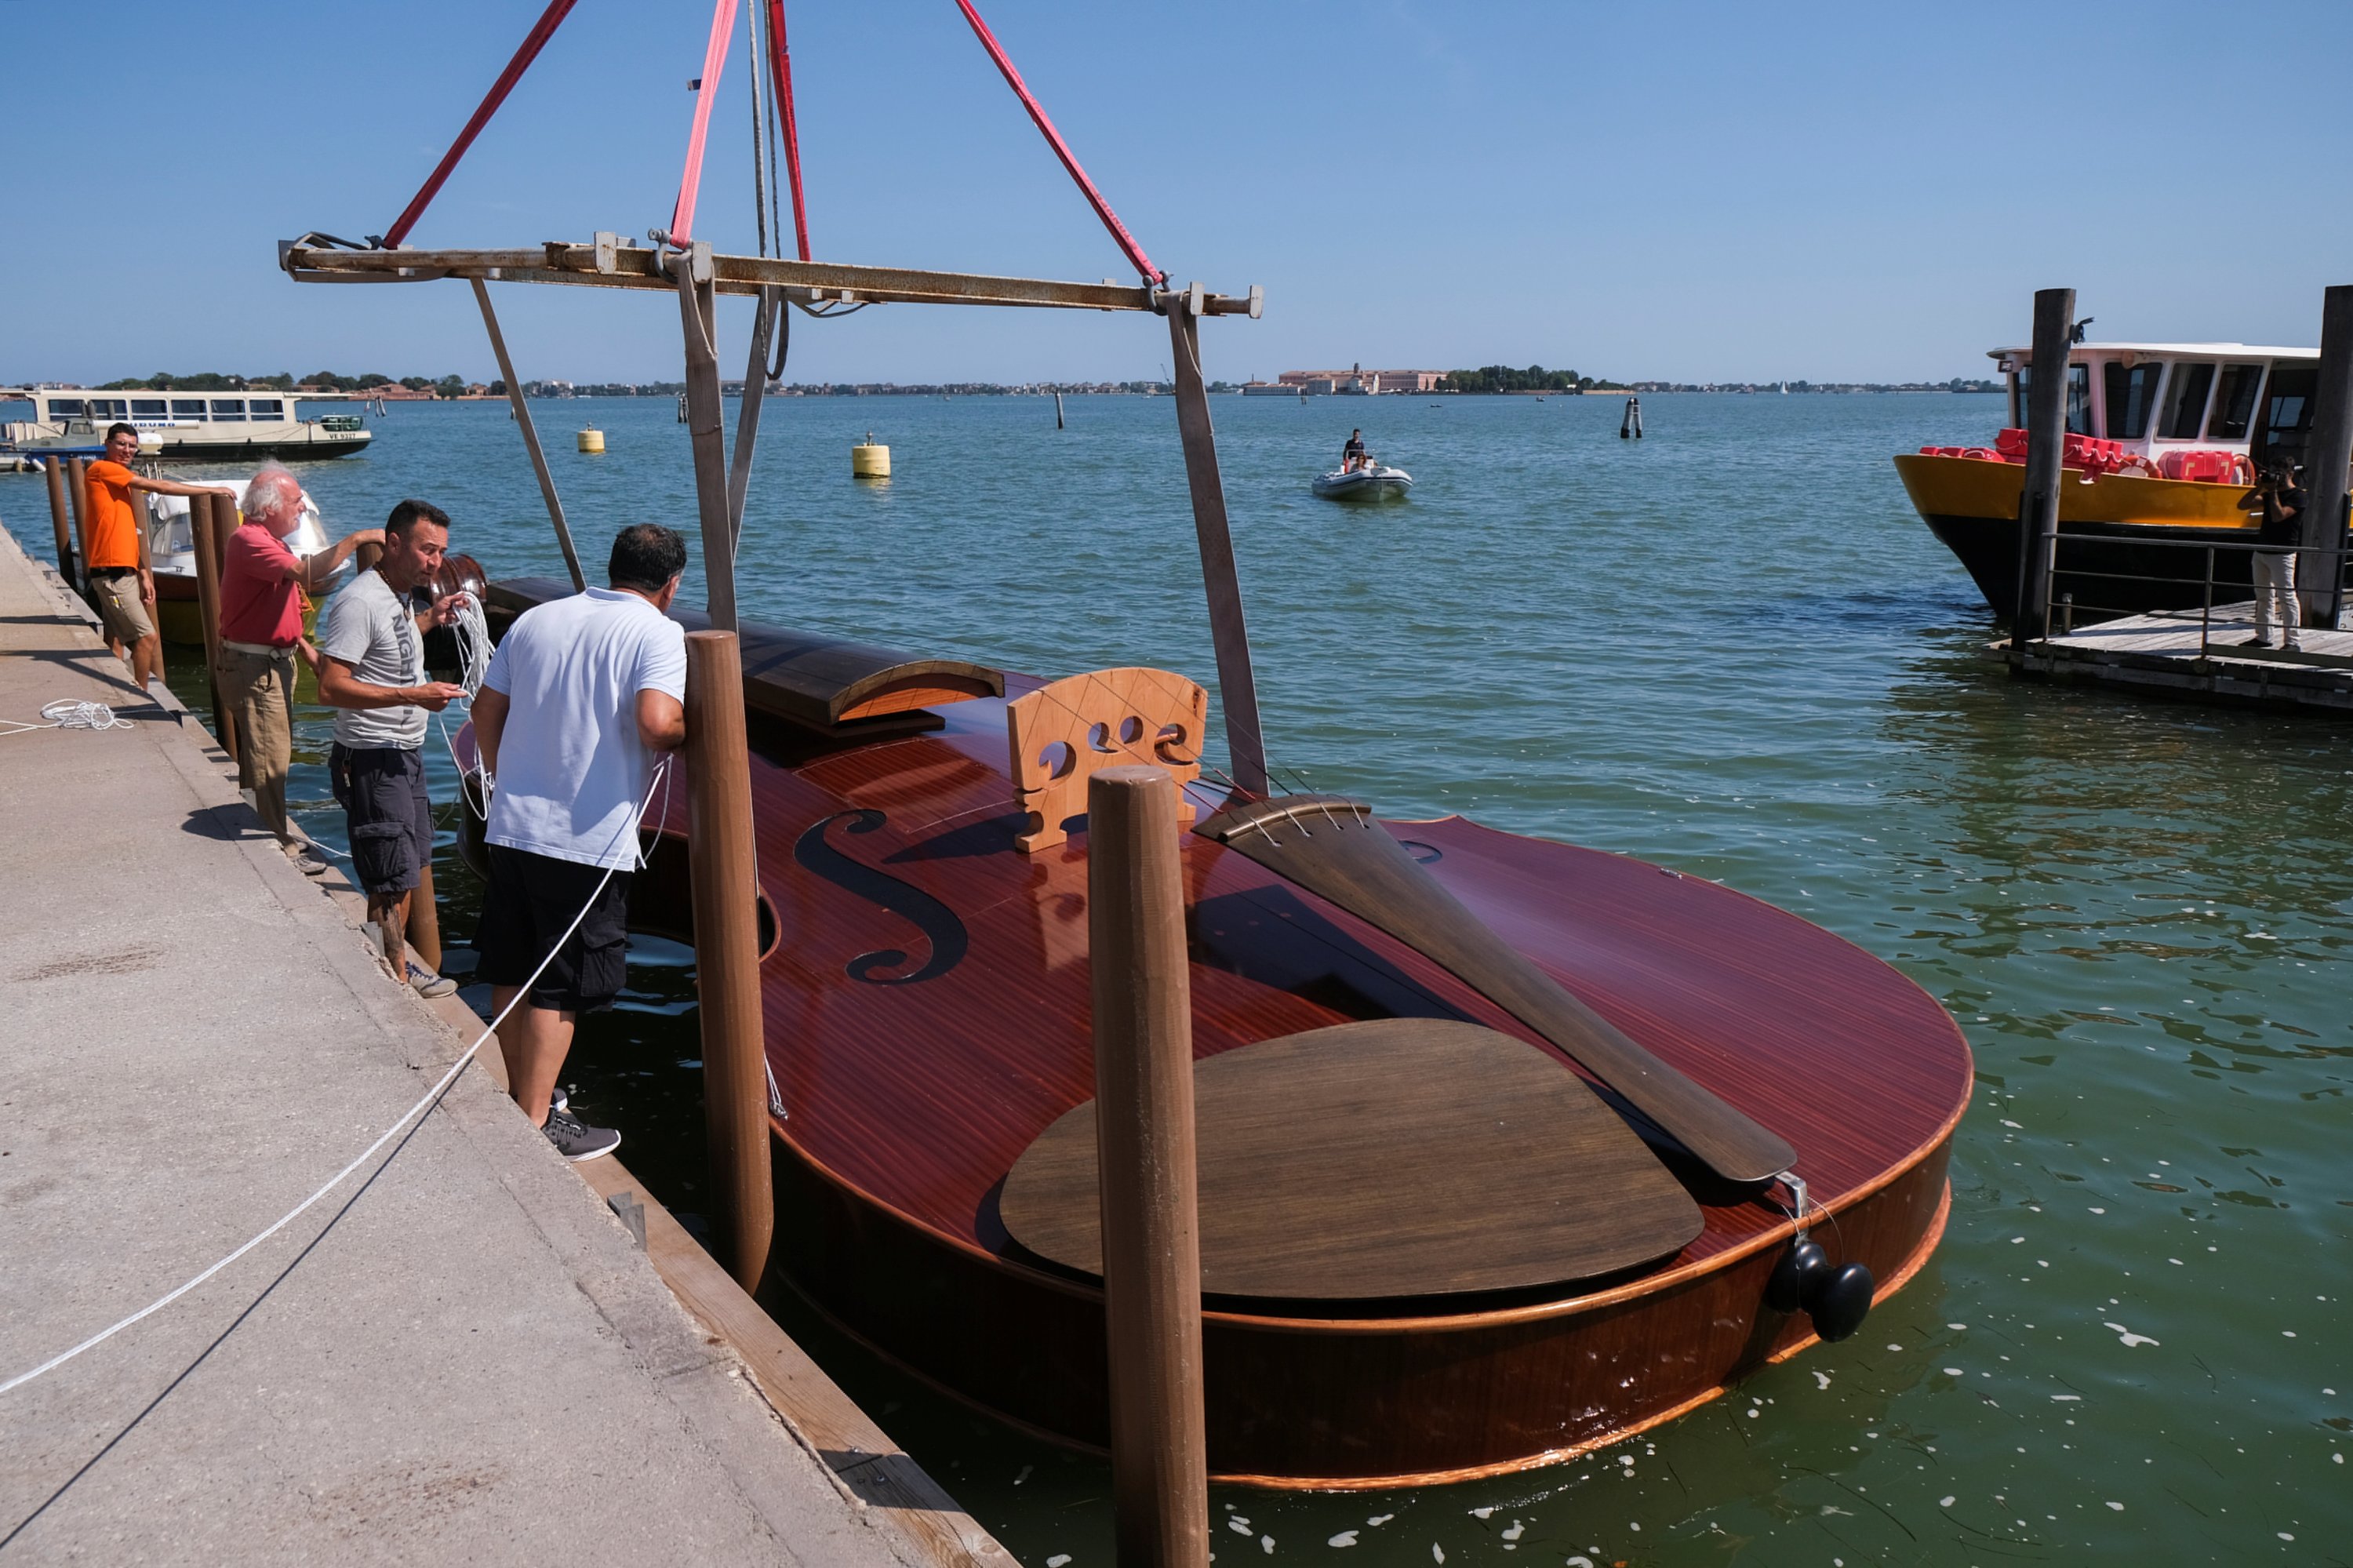 A boat in the shape of a violin, titled 'Violin of Noah', built during the pandemic by artist Livio De Marchi in collaboration with Consorzio Venezia Sviluppo and is dedicated to people who have died from coronavirus, is seen during a test-ride, in Venice, Italy, August 6, 2021. (Reuters Photo)